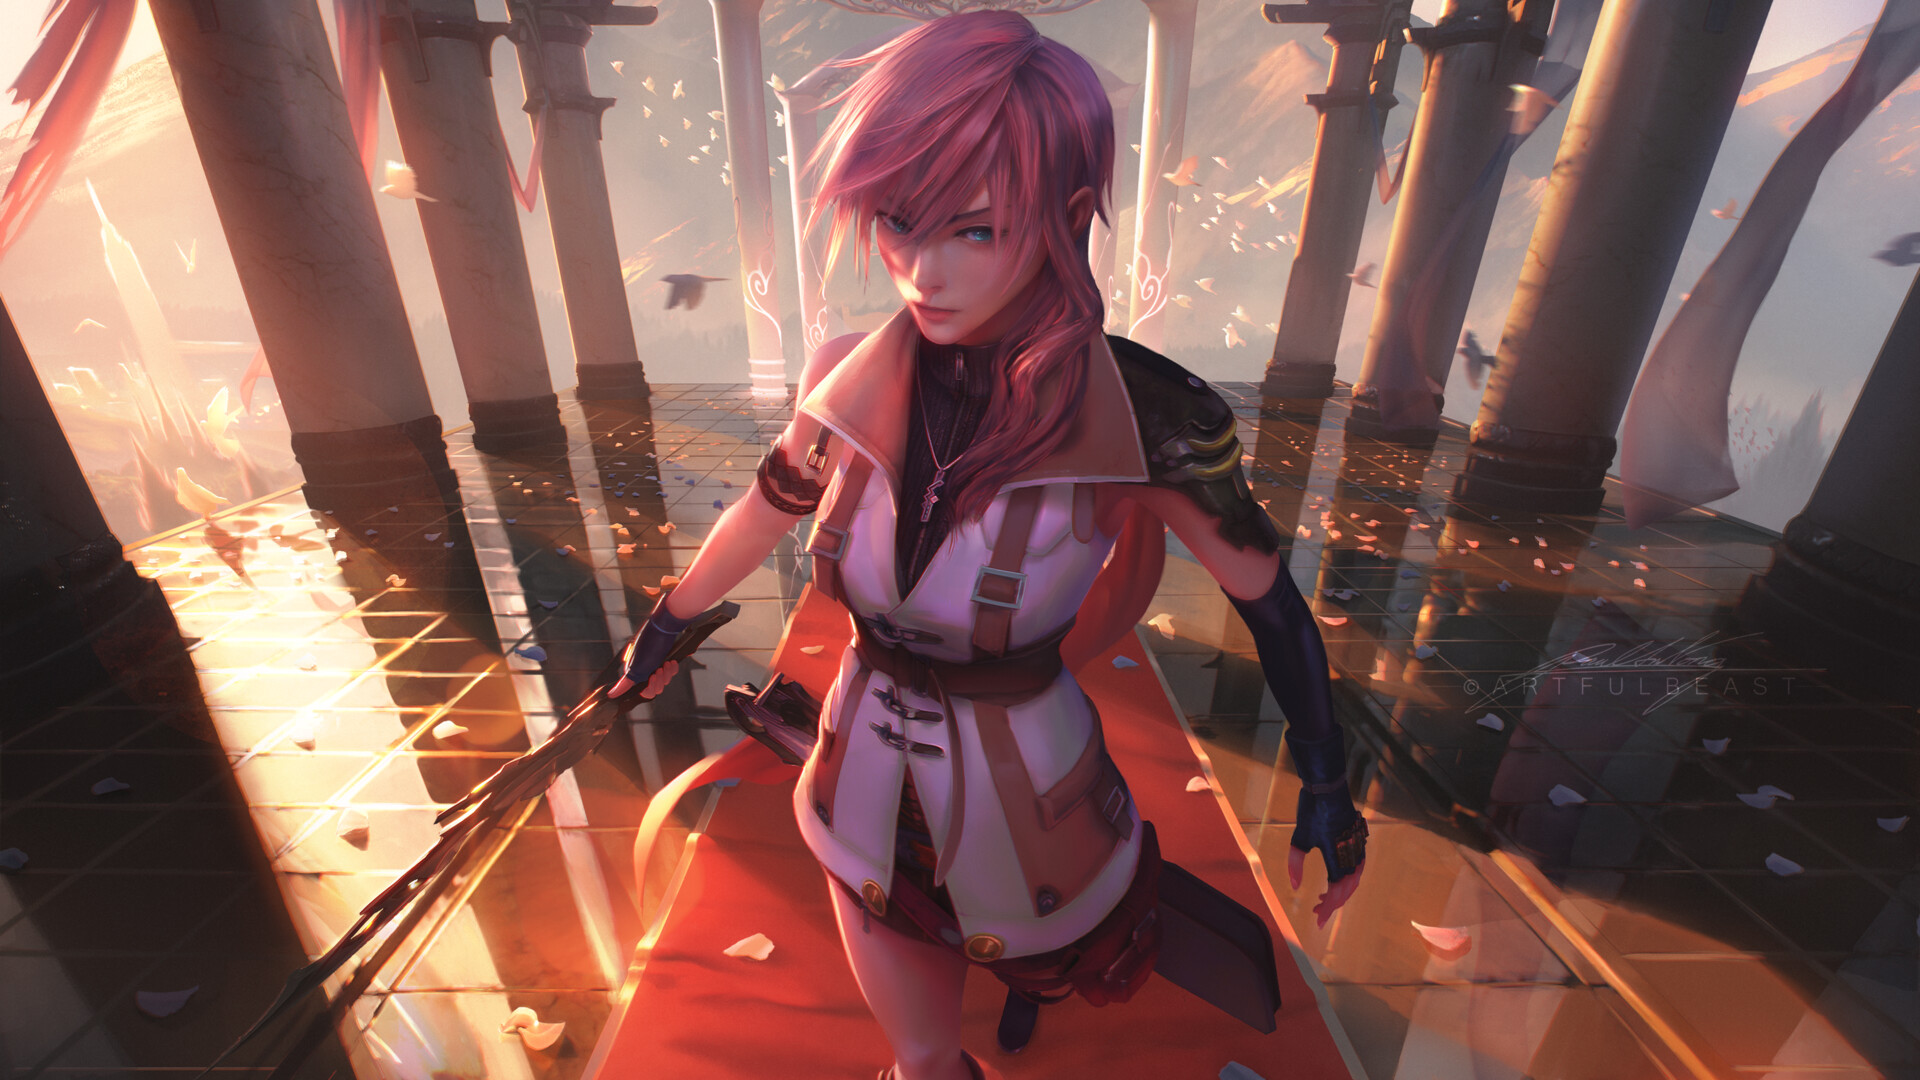 Video Game Final Fantasy XIII HD Wallpaper by Paul Nong